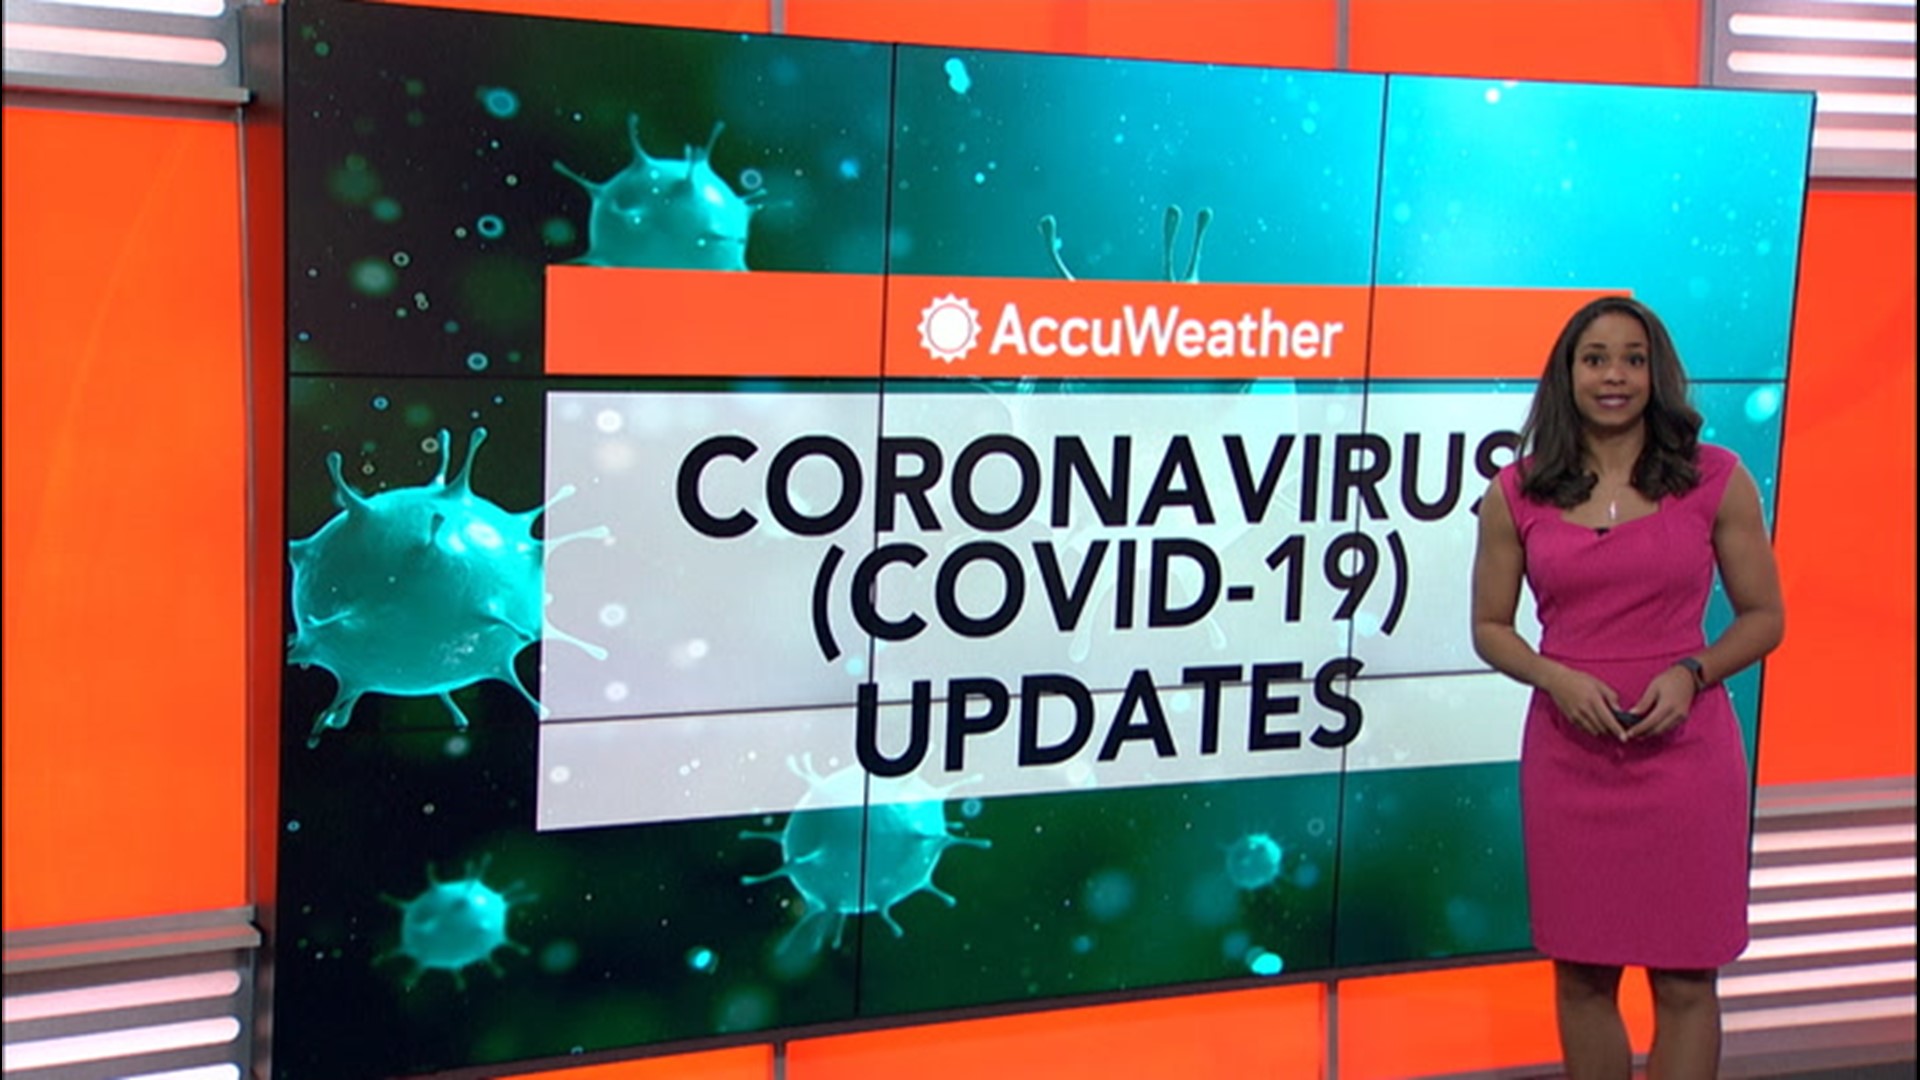 Brittany Boyer had the latest on the coronavirus pandemic on April 8, with information involving New York's death toll, Boris Johnson, and Wuhan restrictions.